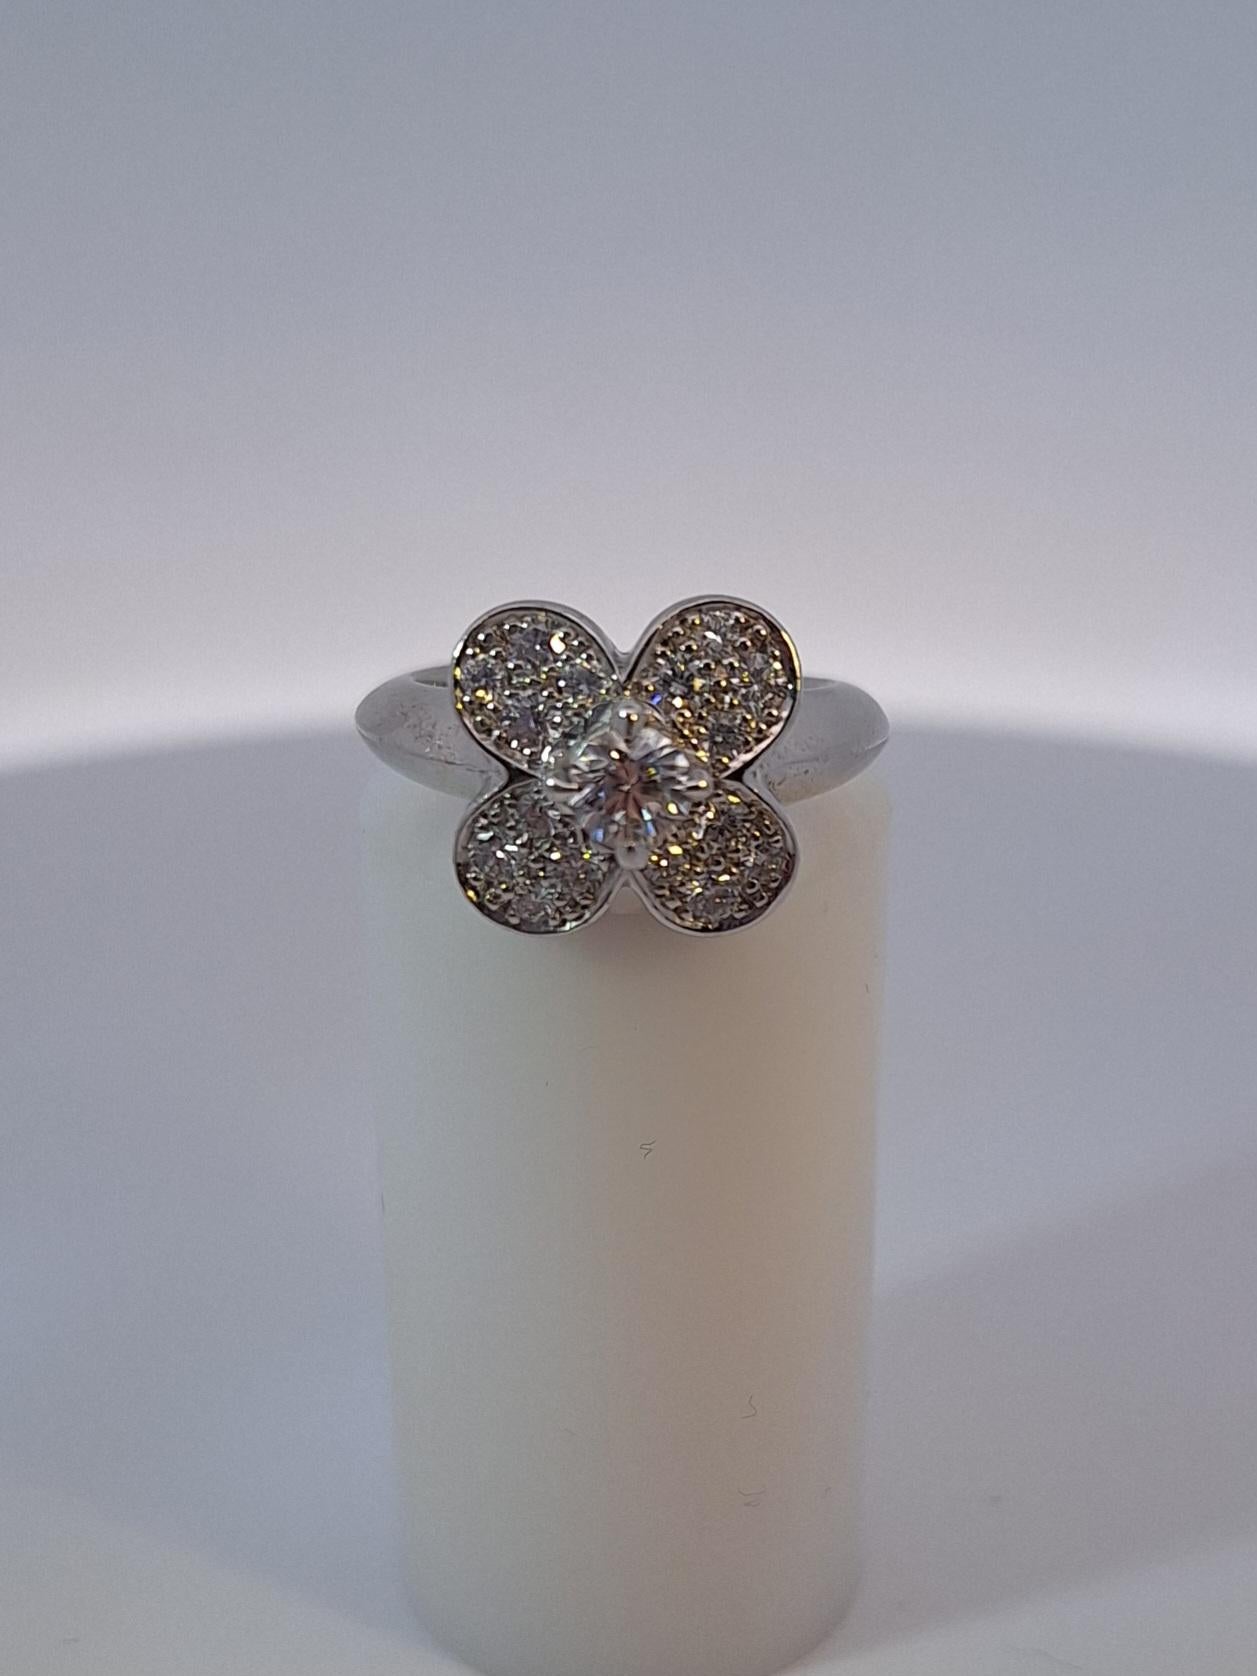 The ring designed as a quatrefoil flower featuring a large round diamond at the center, the petals pavé set with diamonds.

Diamonds weighing a total of approximately 0.75 carat
Signed VCA
18 karat white gold
Gross weight approximately 3.79